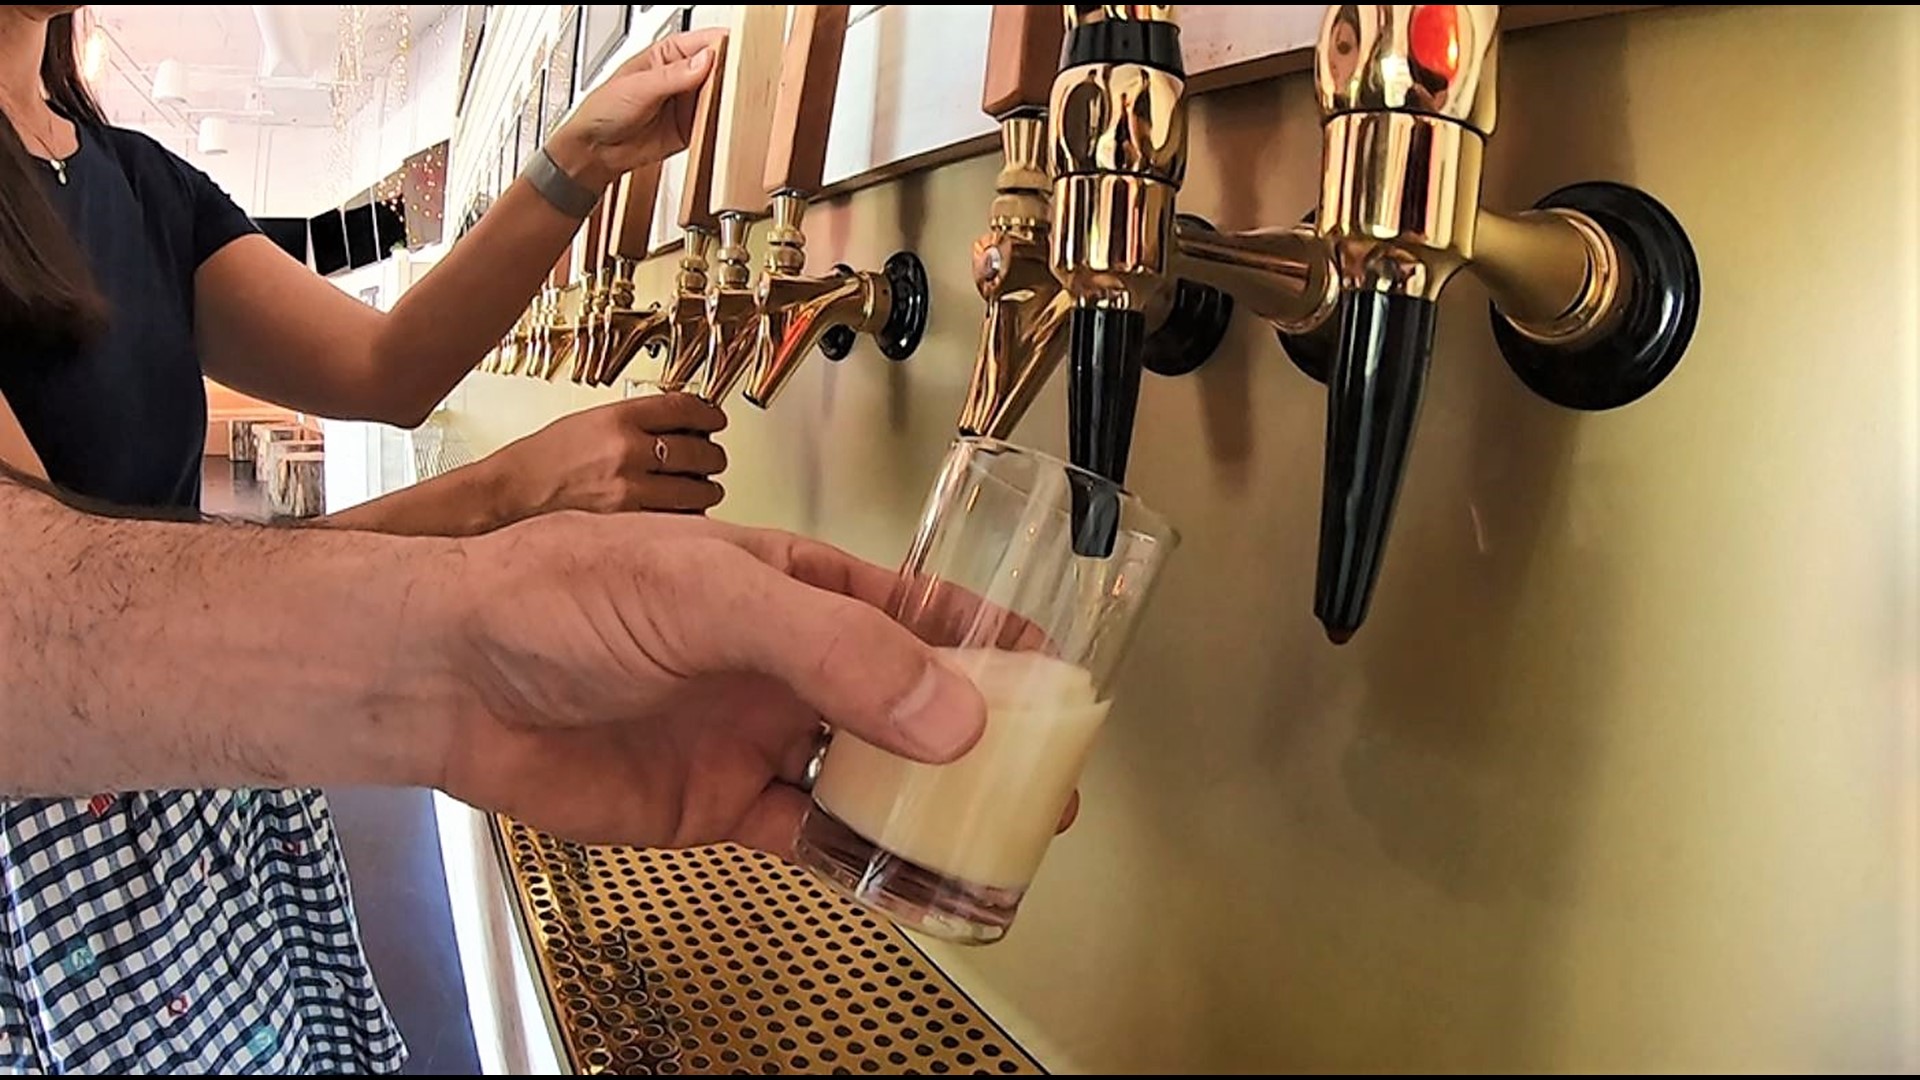 Tapster features 57 taps of beer, cider, wine and more. #k5evening